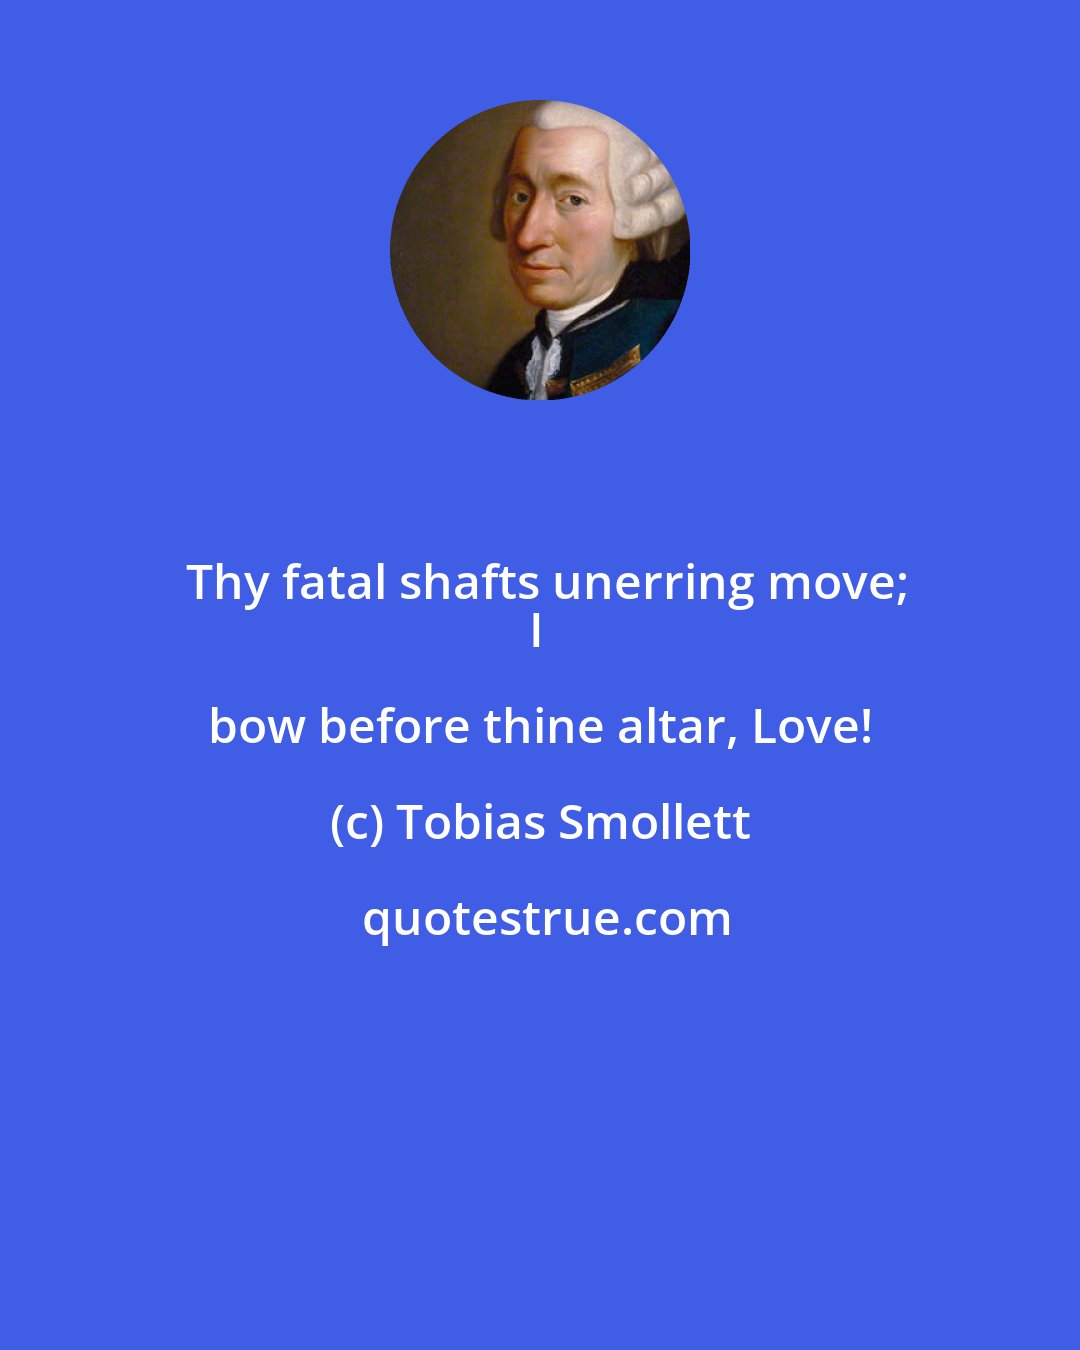 Tobias Smollett: Thy fatal shafts unerring move;
I bow before thine altar, Love!